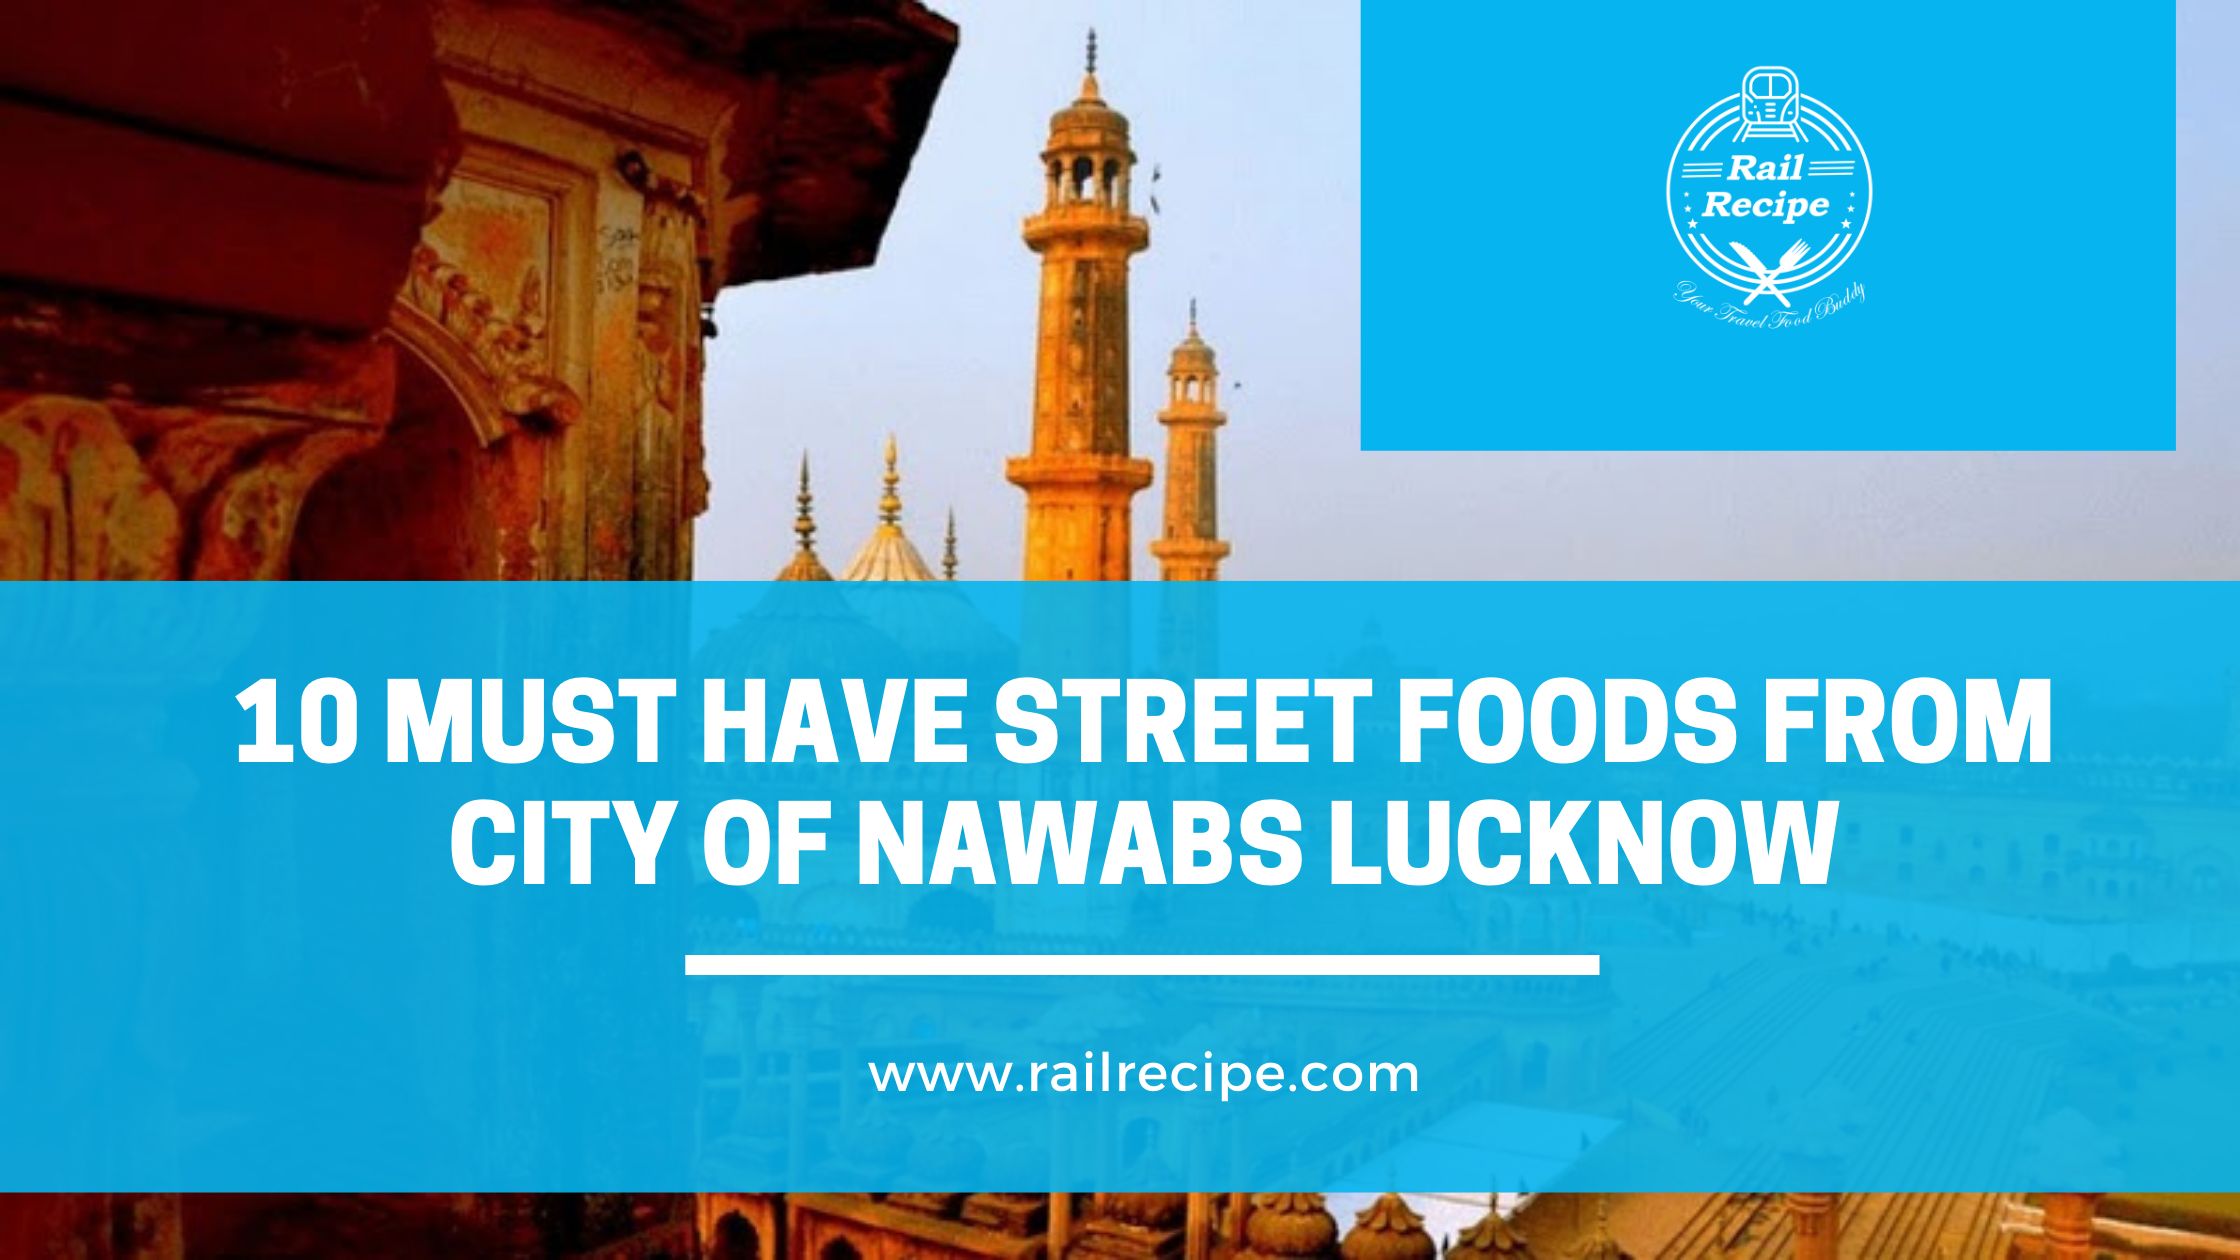 10 Must Have Street Foods From City of Nawabs Lucknow